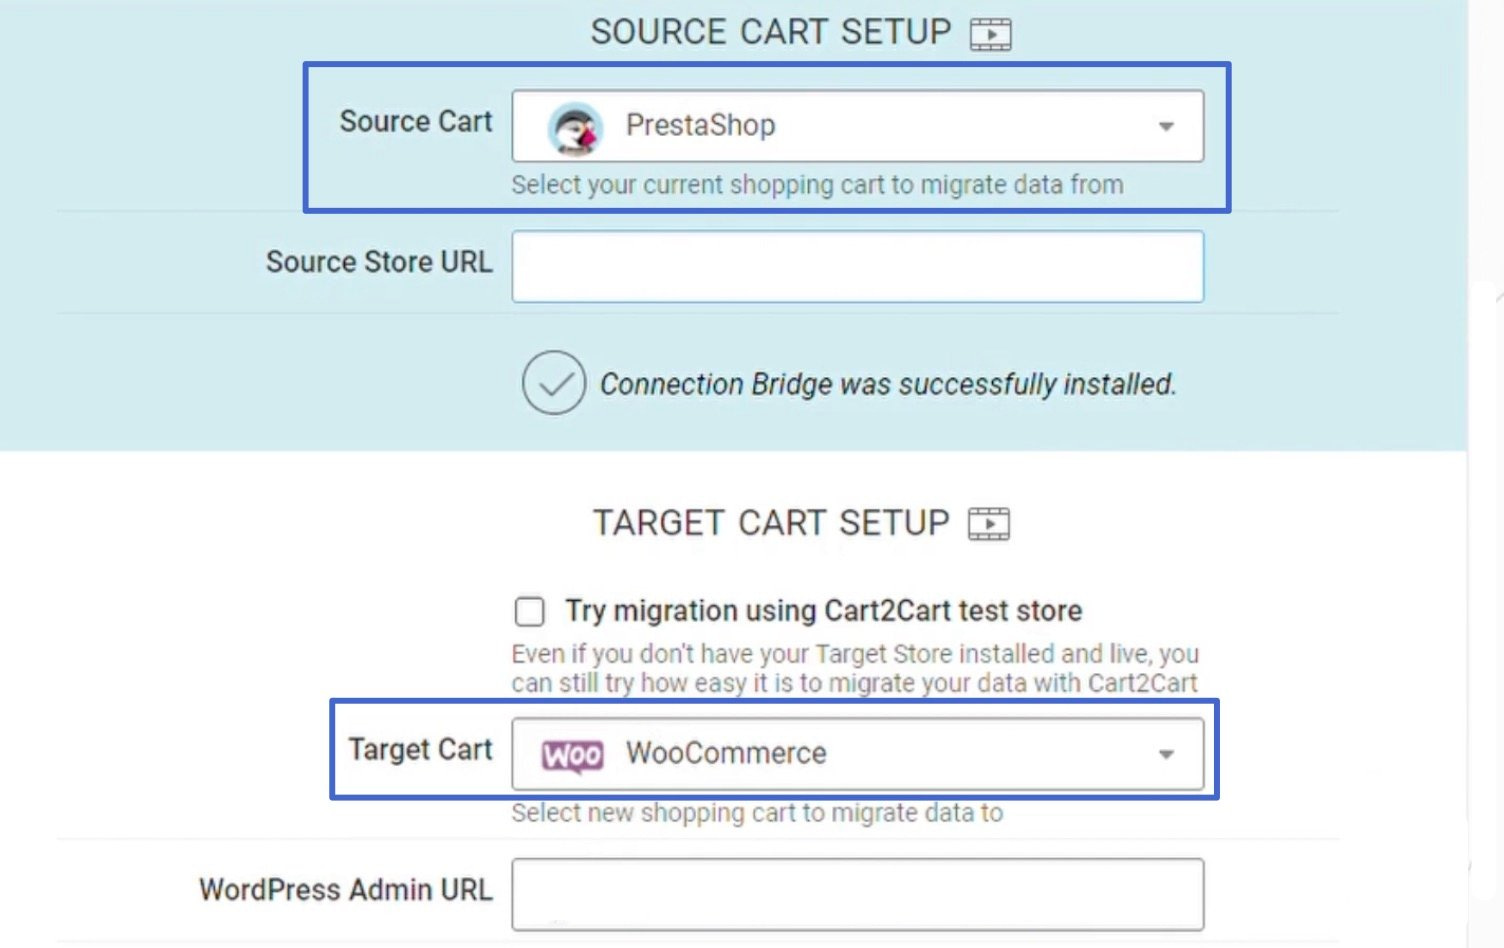 Picking source cart and target cart to migrate from PrestaShop to WooCommerce.